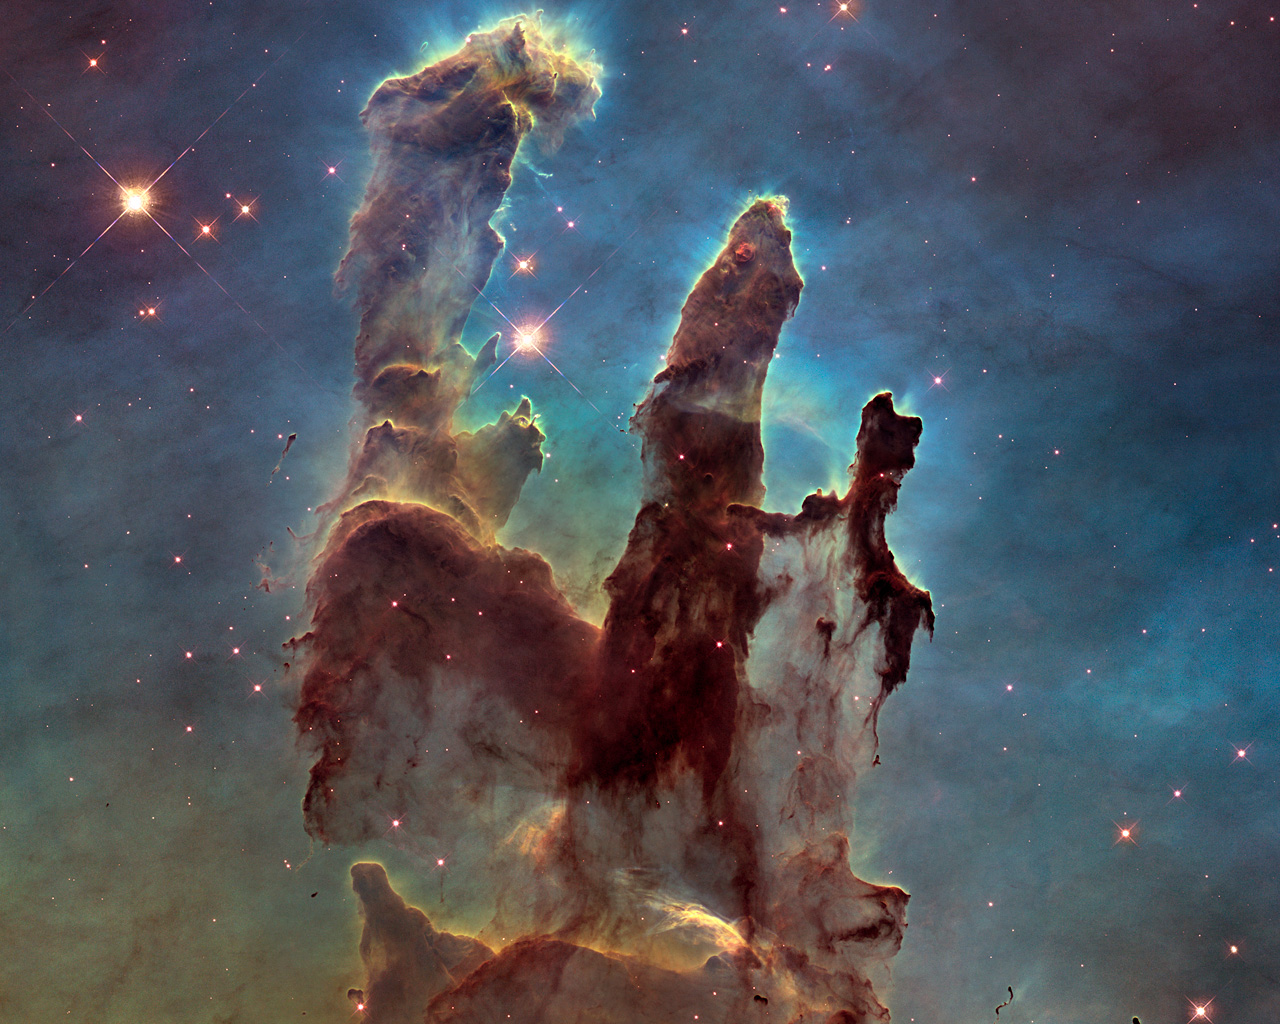 The NASA/ESA Hubble Space Telescope has revisited one of its most iconic and popular images: the Eagle Nebula’s Pillars of Creation. This image shows the pillars as seen in visible light, capturing the multi-coloured glow of gas clouds, wispy tendrils of dark cosmic dust, and the rust-coloured elephants’ trunks of the nebula’s famous pillars. The dust and gas in the pillars is seared by the intense radiation from young stars and eroded by strong winds from massive nearby stars. With these new images comes better contrast and a clearer view for astronomers to study how the structure of the pillars is changing over time.